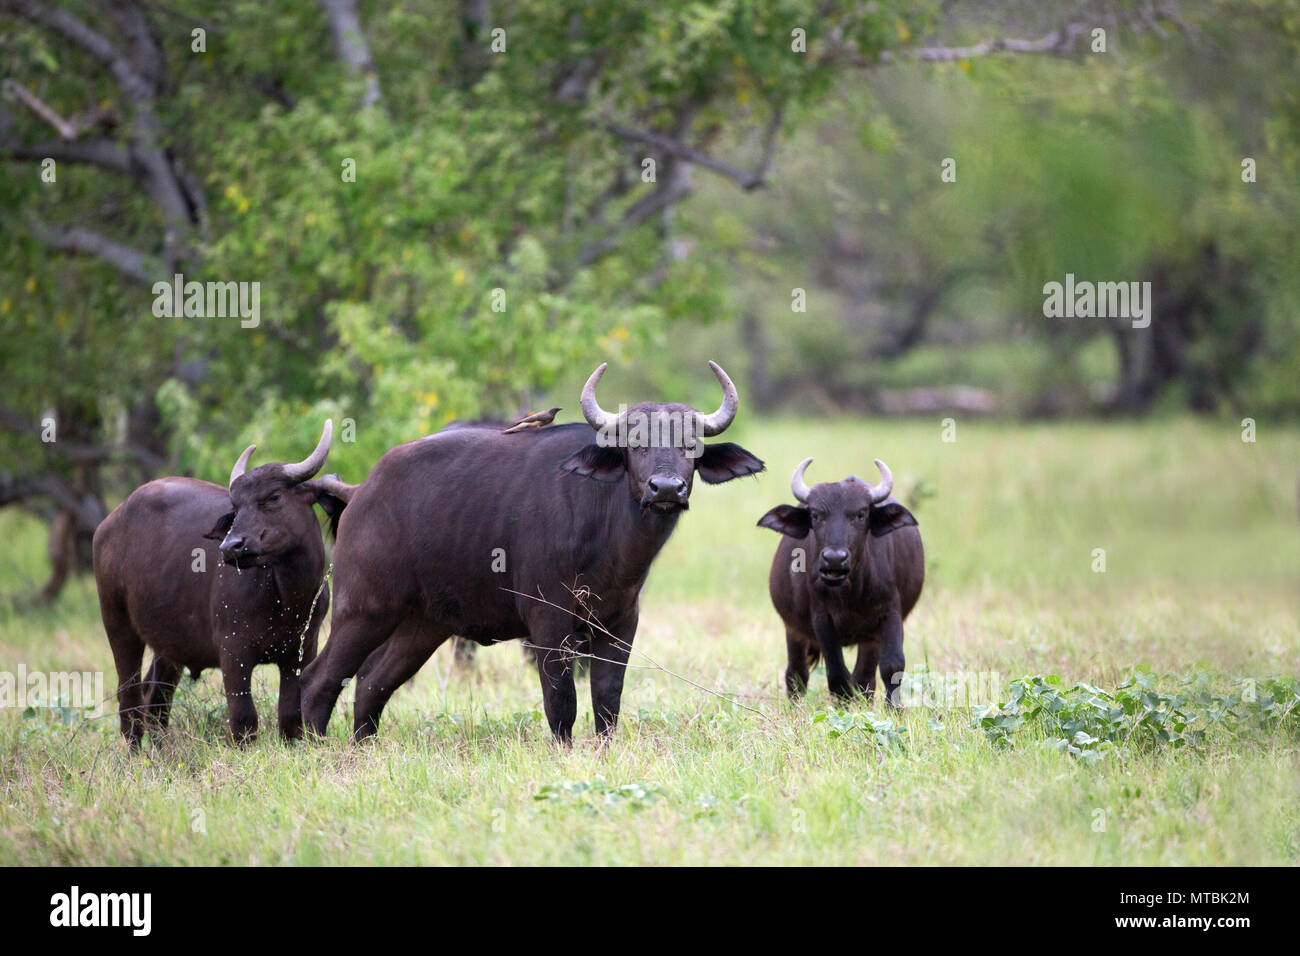 Buffalo (Syncerus caffer). Cows of different ages, heifers, approaching, on way to drinking hole. Stock Photo